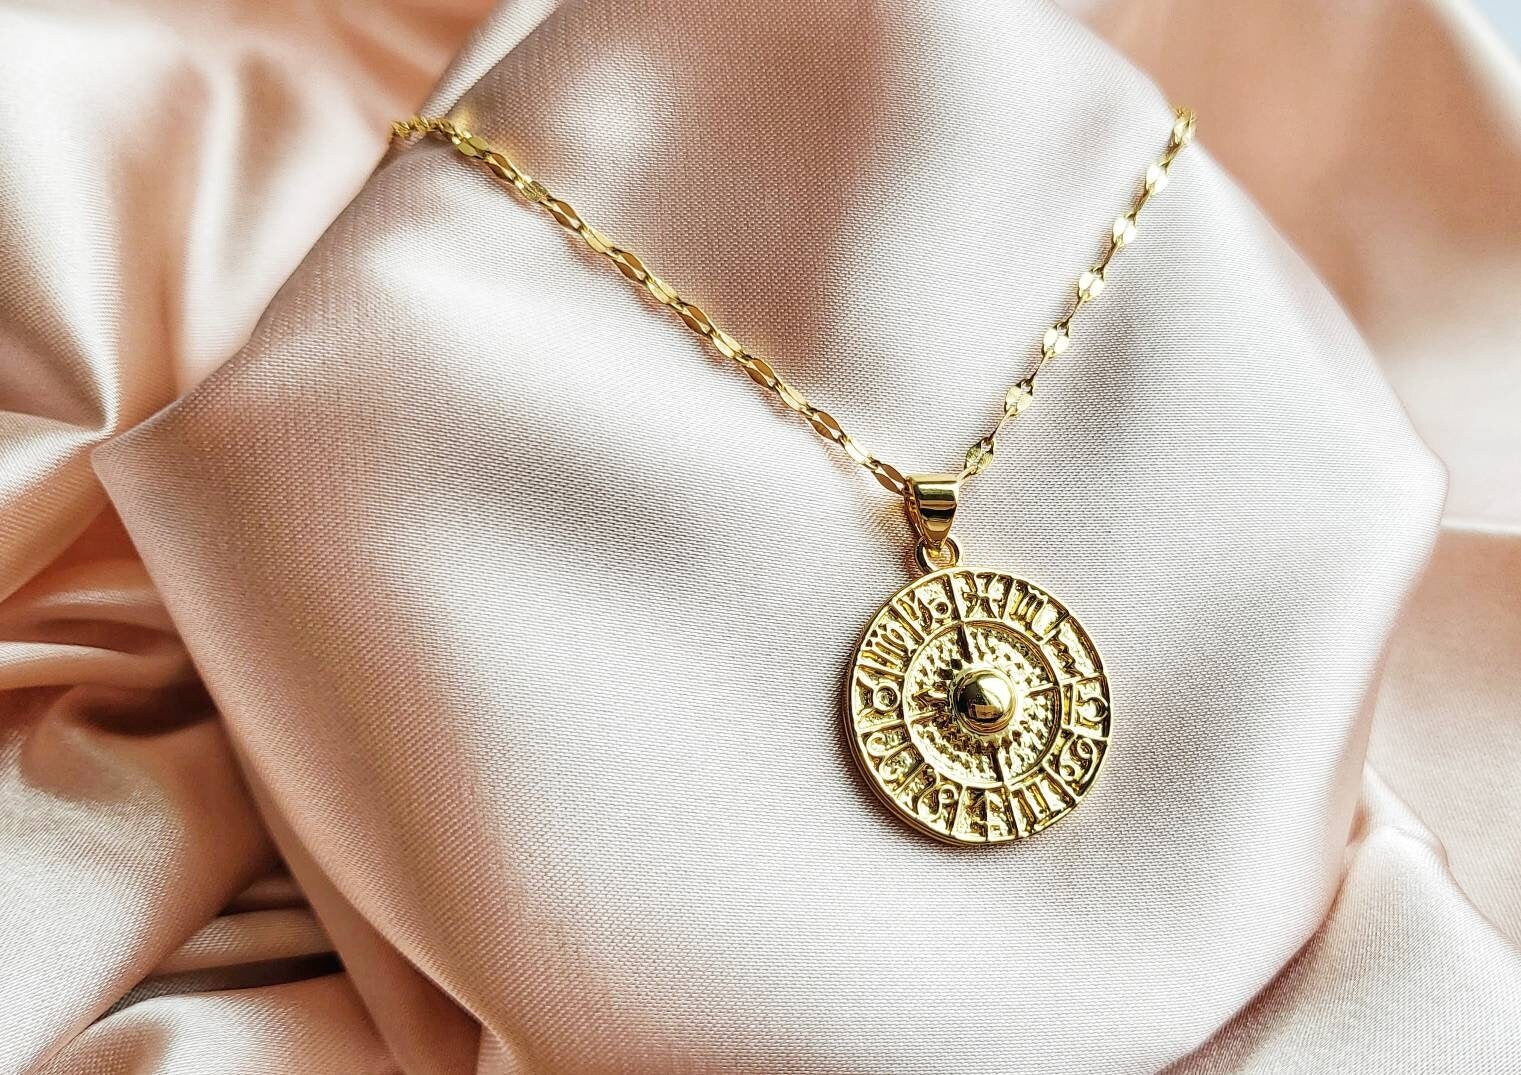 ZODIAC | 14K Gold Astrology Wheel Coin Necklace | Delicate, Minimalist Sequin Necklaces | Spiritual Celestial Jewelry | Gifts for Astrologer